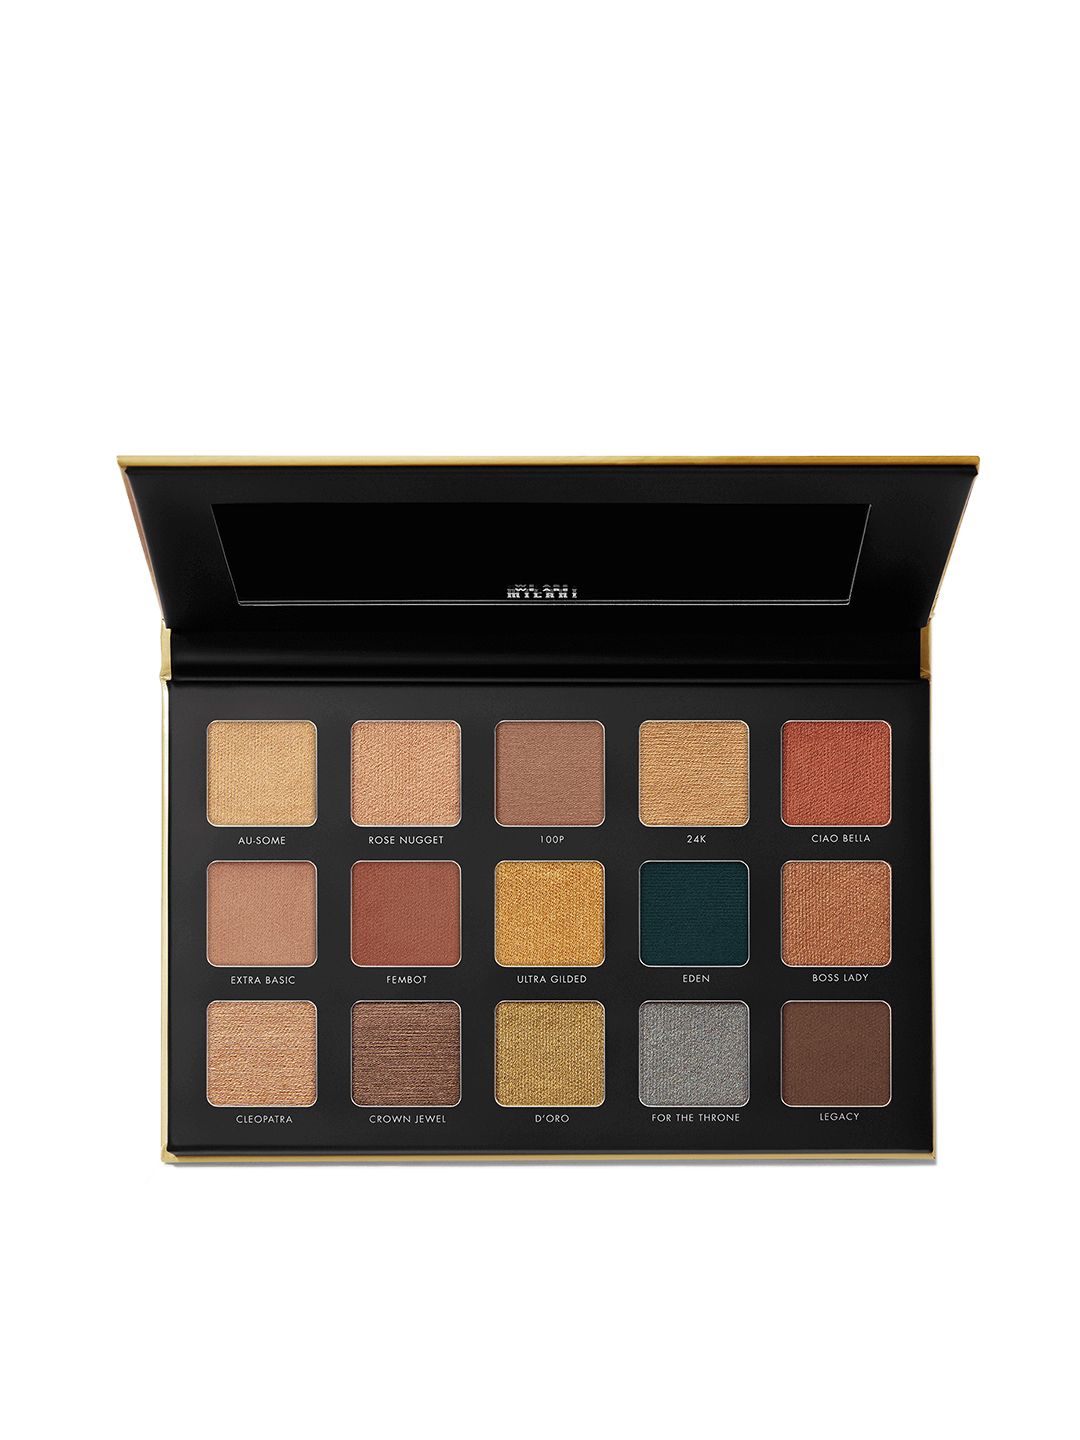 Milani Gilded Gold Eyeshadow Palette - 110 Price in India